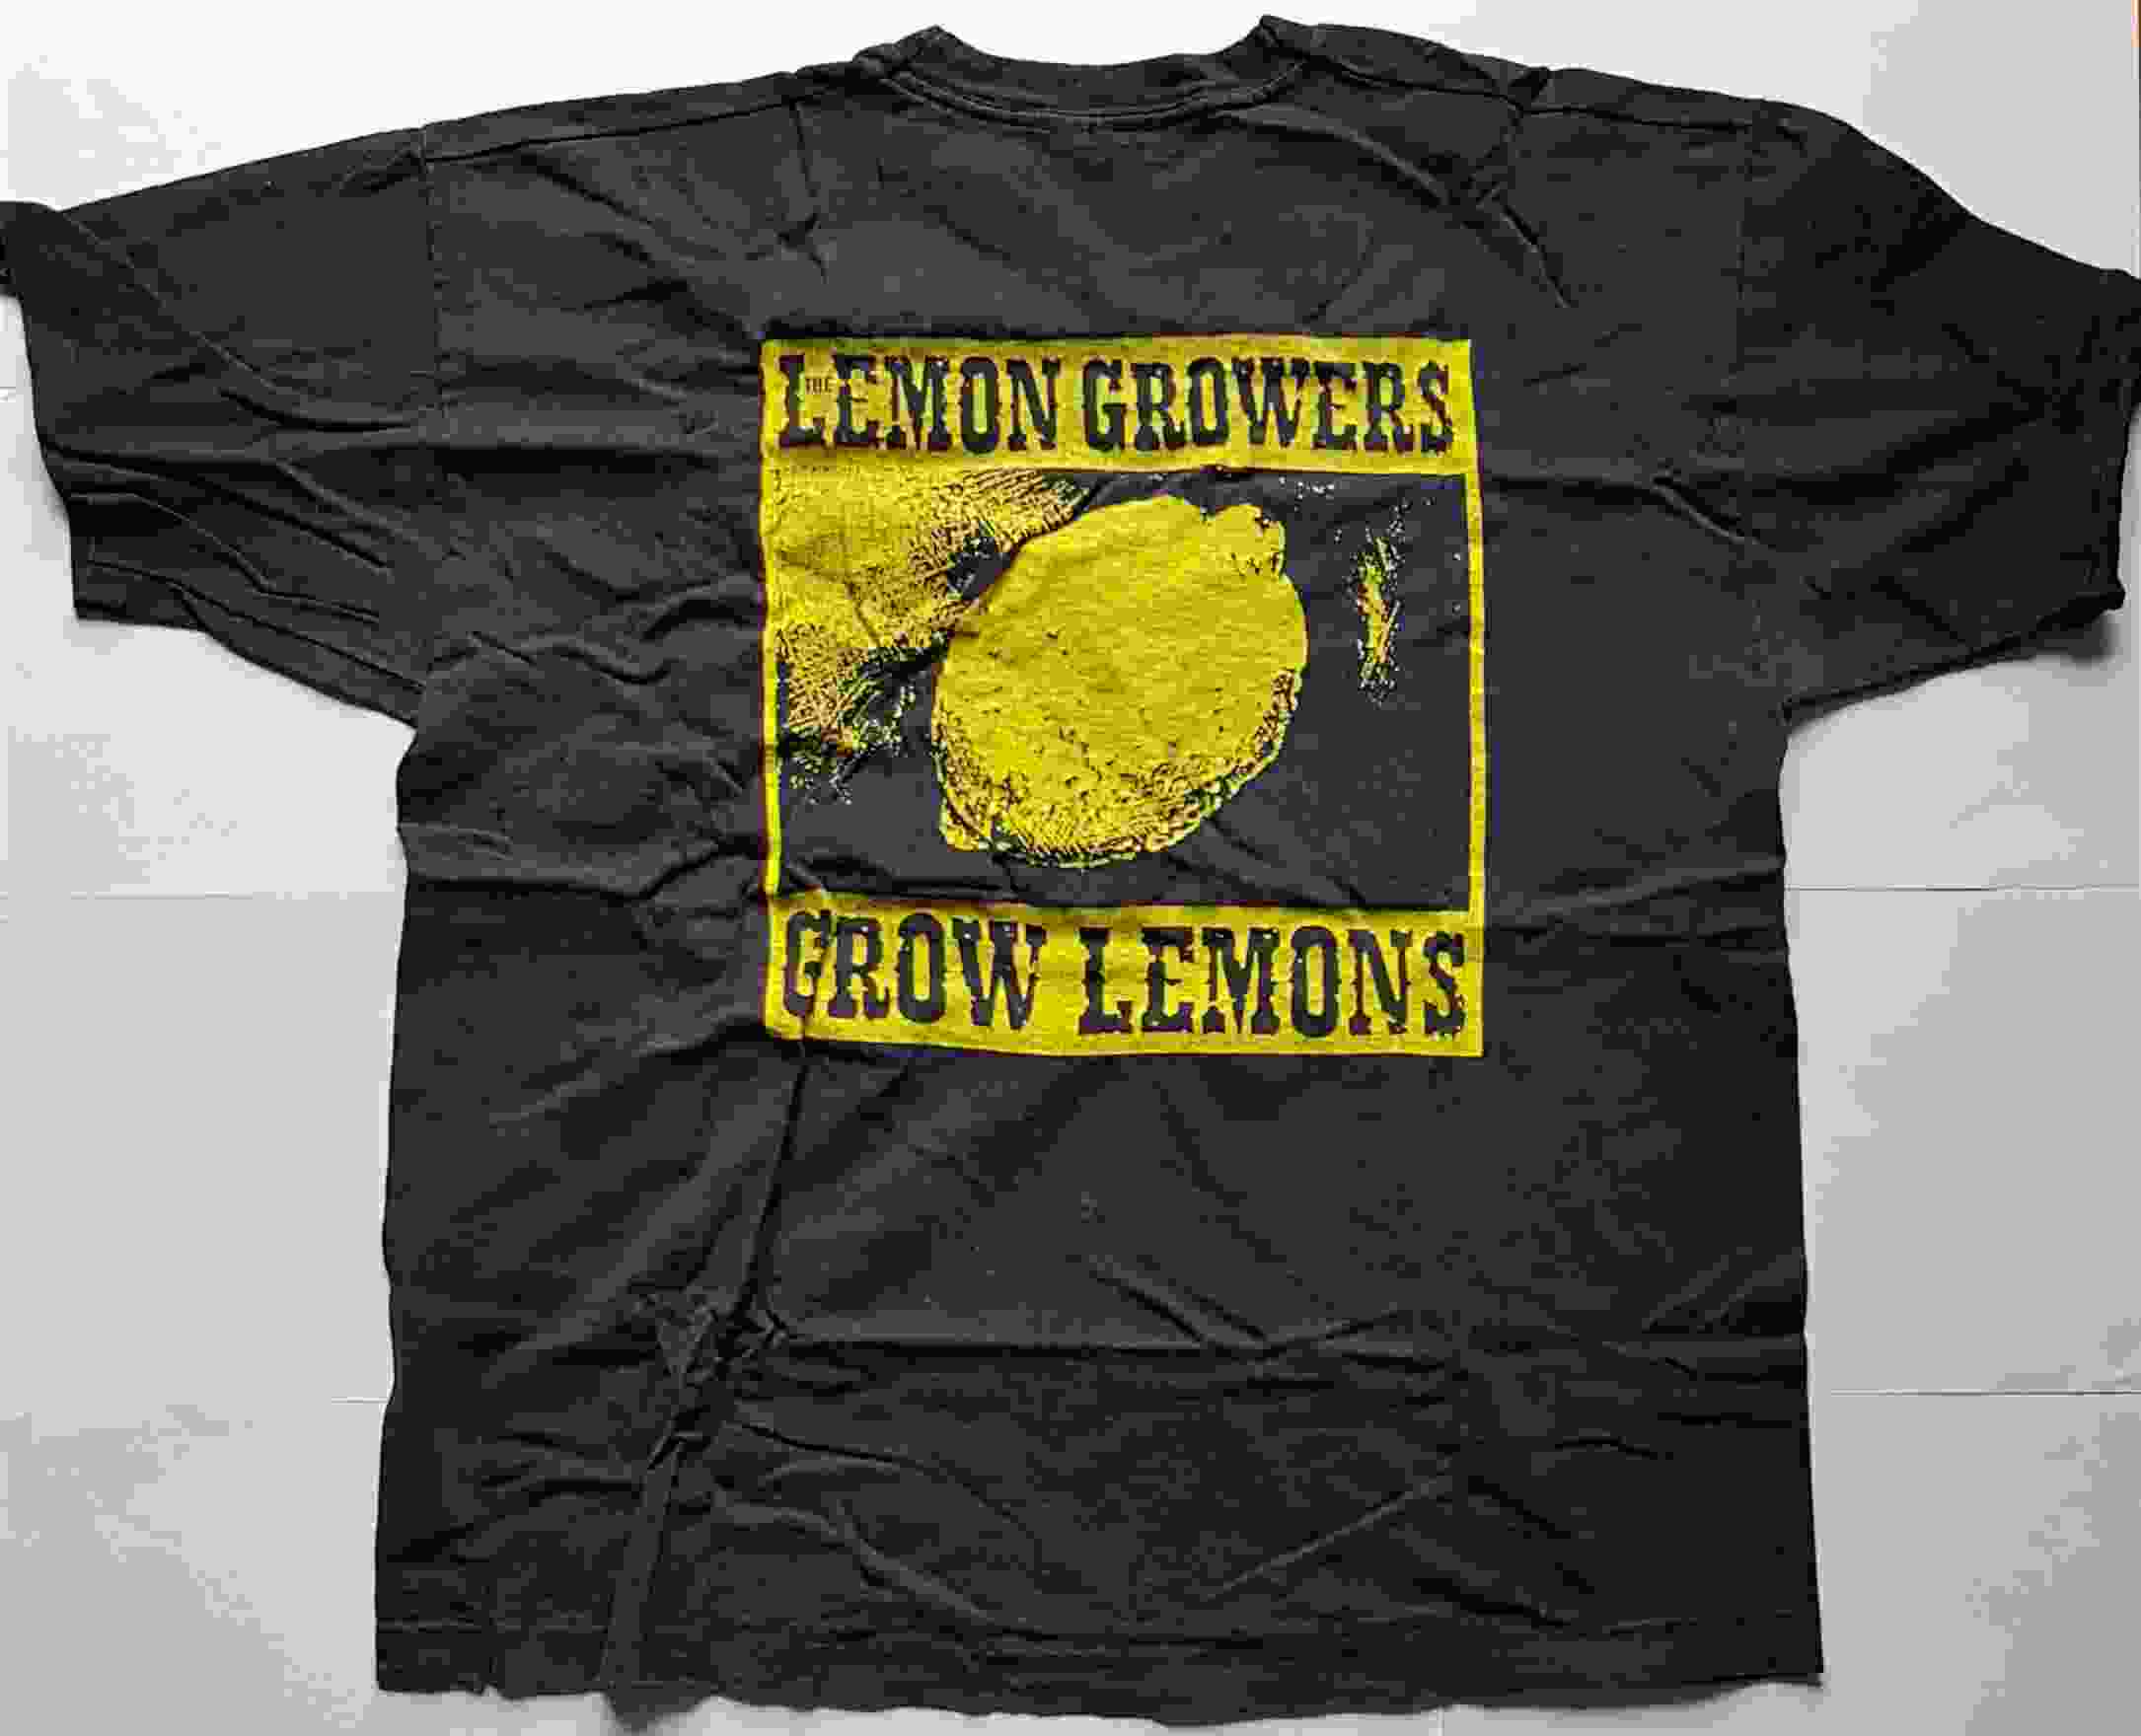 Picture of TS-GL Grow lemons by artist The Lemon Growers 